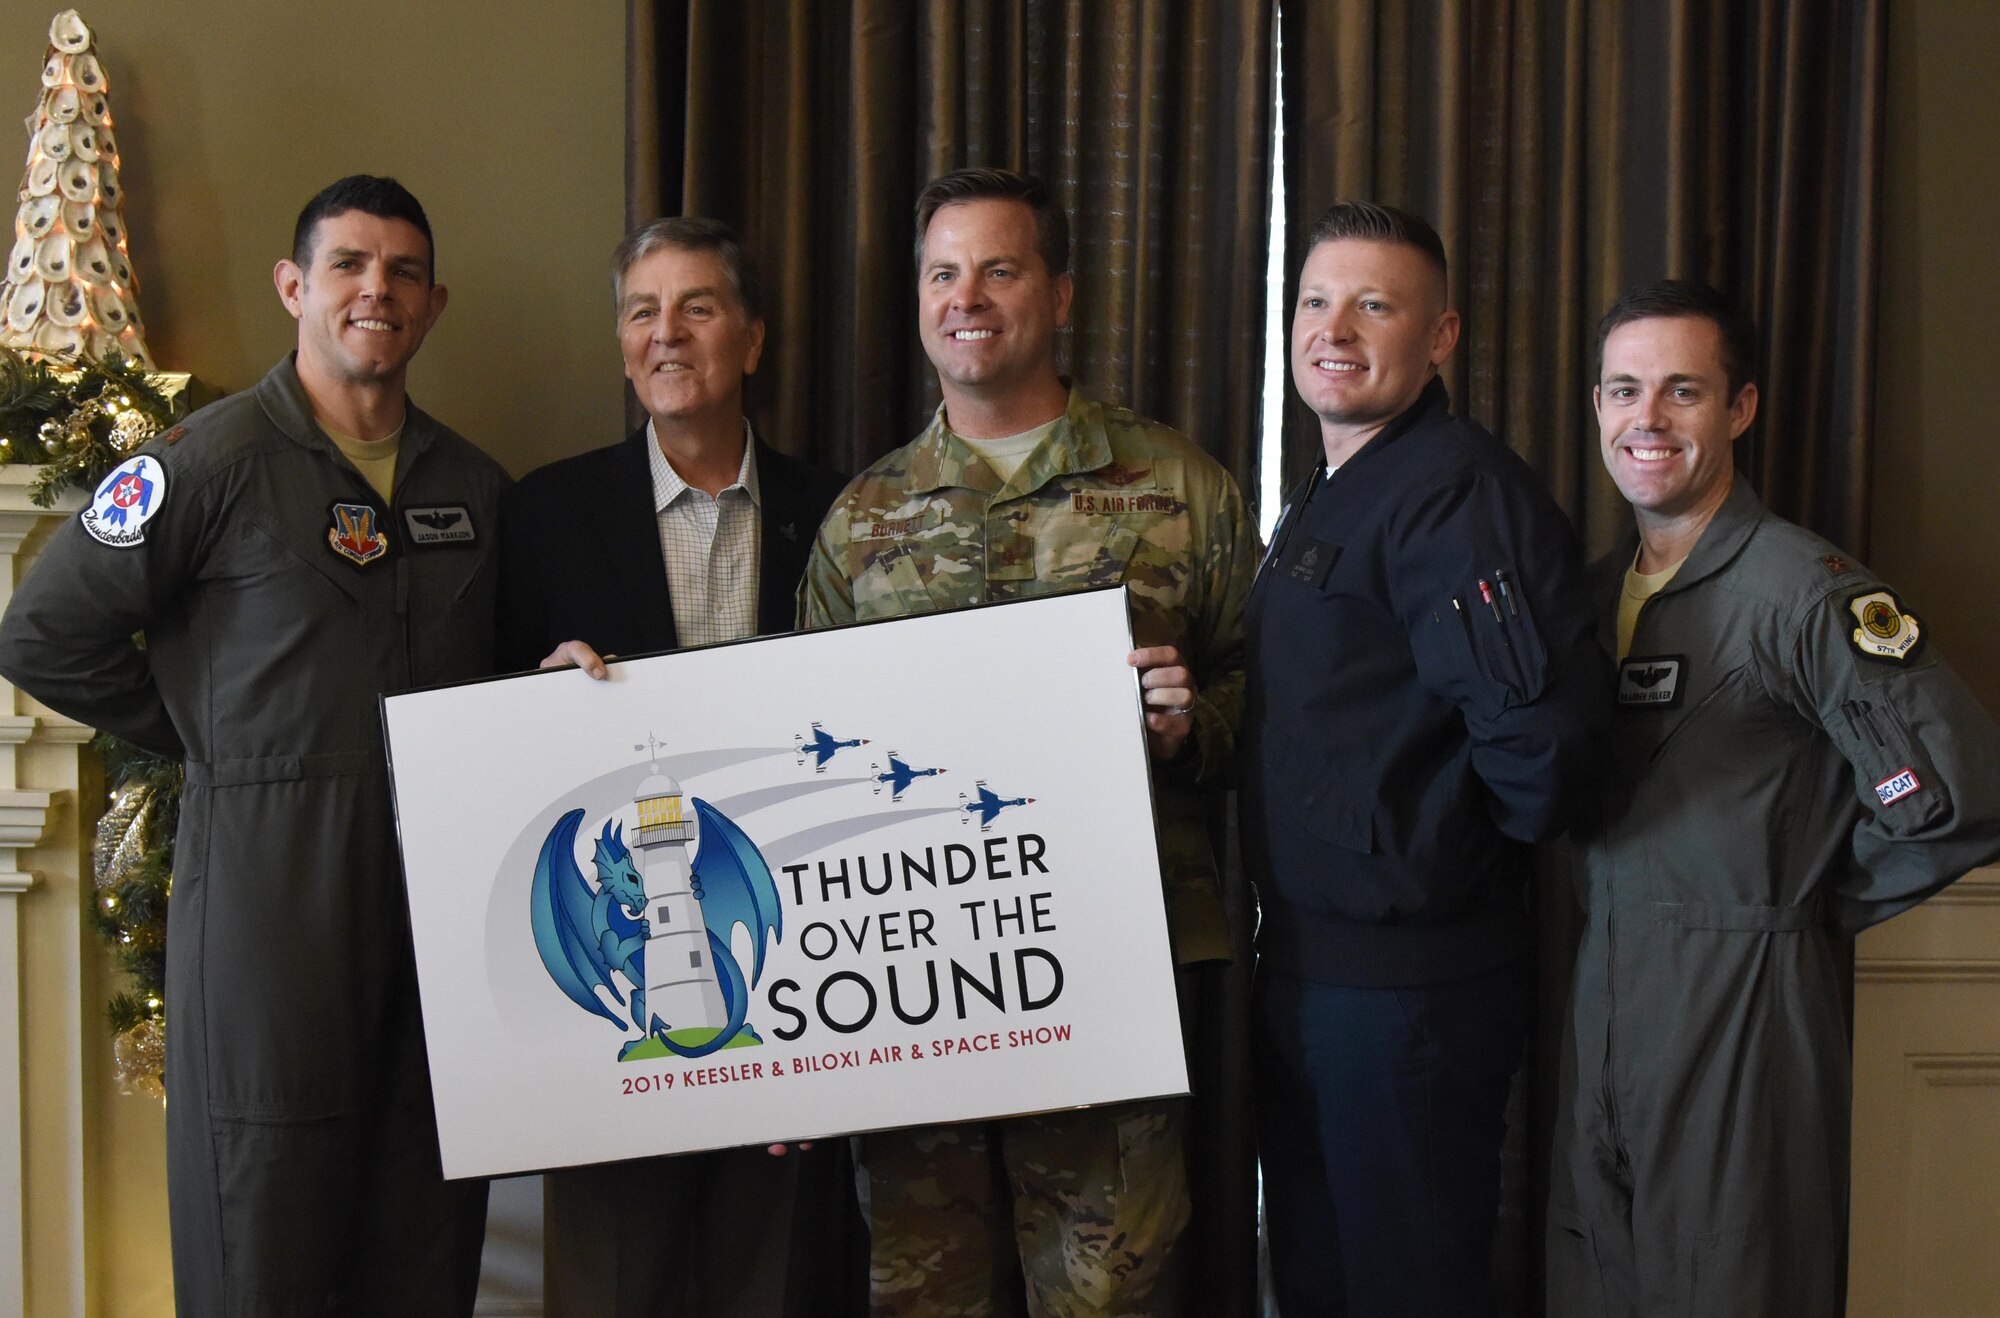 Keesler and Biloxi leadership, along with two U.S. Air Force Thunderbird pilots, pose for a photo during a press conference formally announcing Thunder Over the Sound: The Keesler and Biloxi Air and Space Show at the Biloxi Visitors Center, in Biloxi, Mississippi, Dec. 18, 2018. The press conference reviewed and confirmed information and acts for the air show and allowed attendees to meet with and ask questions of all speakers. (U.S. Air Force photo by Kemberly Groue)